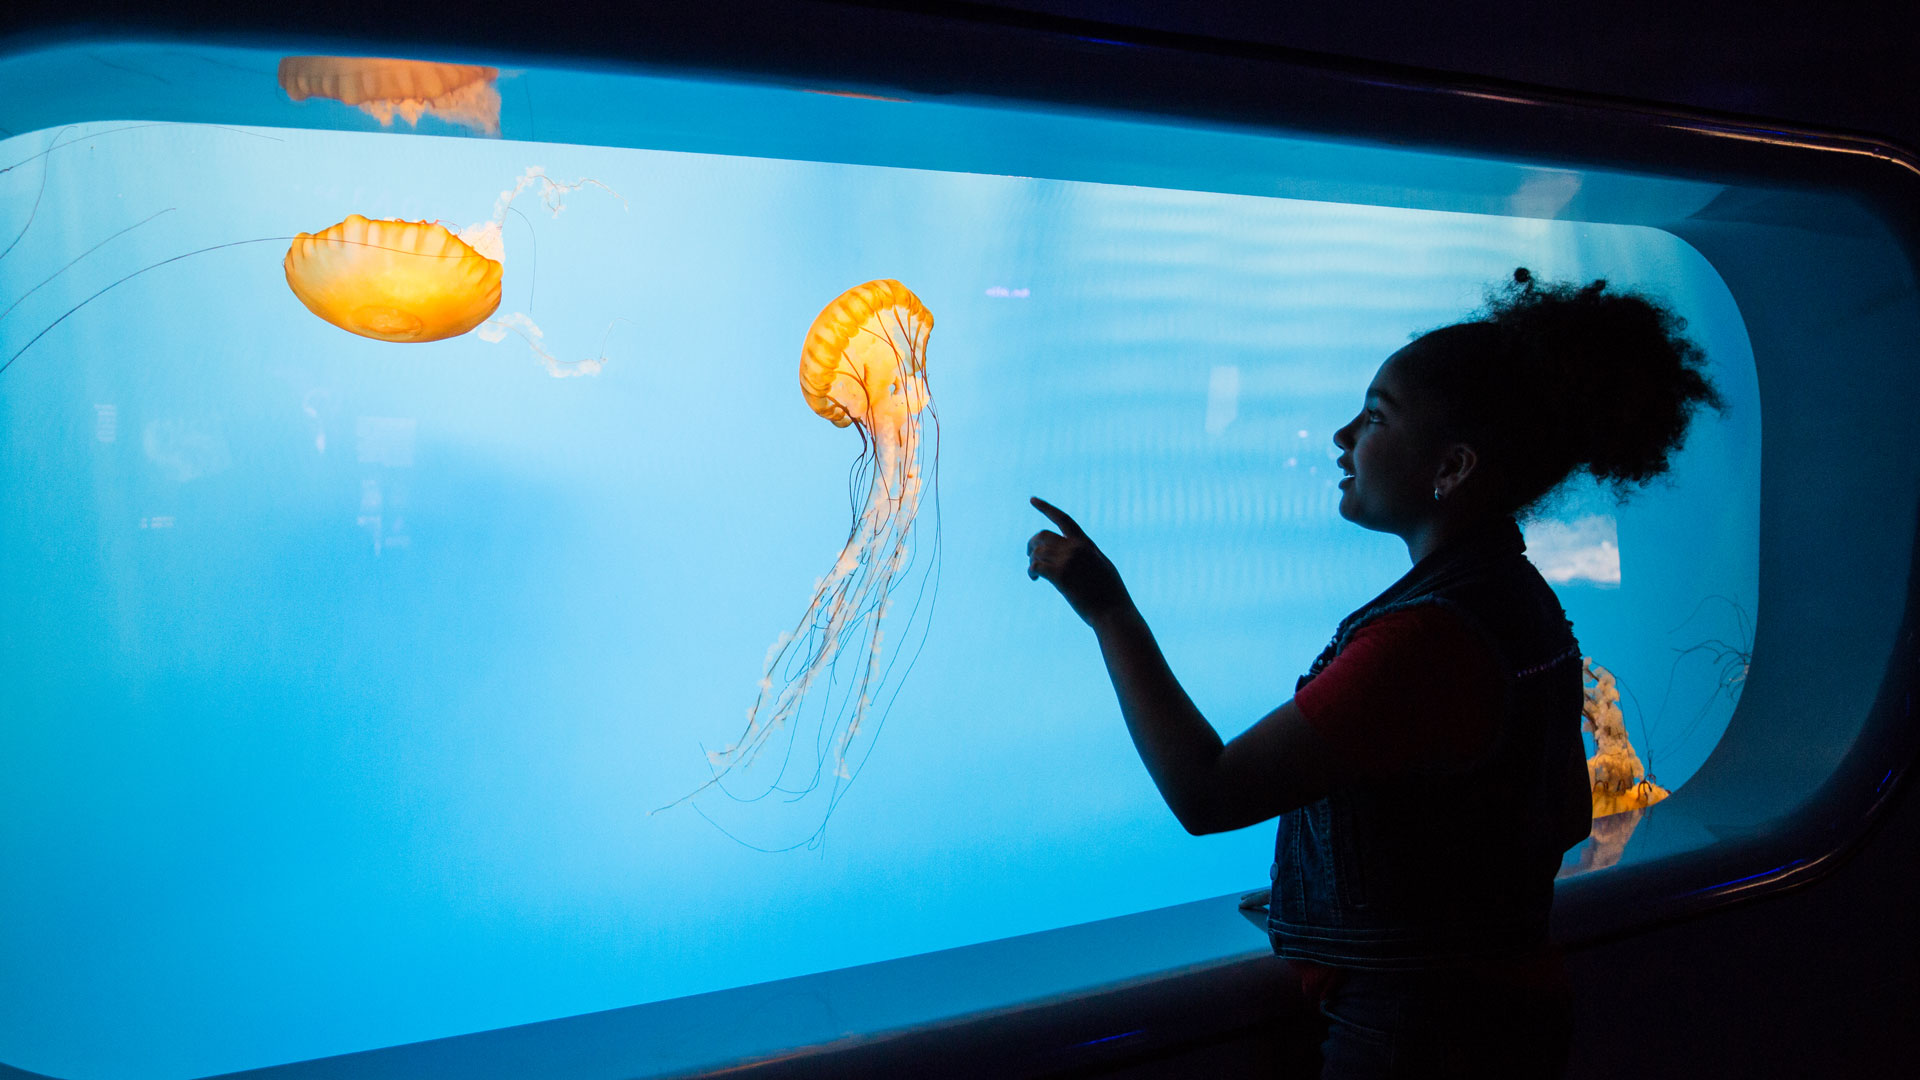 Young girl in front of aquarium tank, pointing at orange jellyfish.